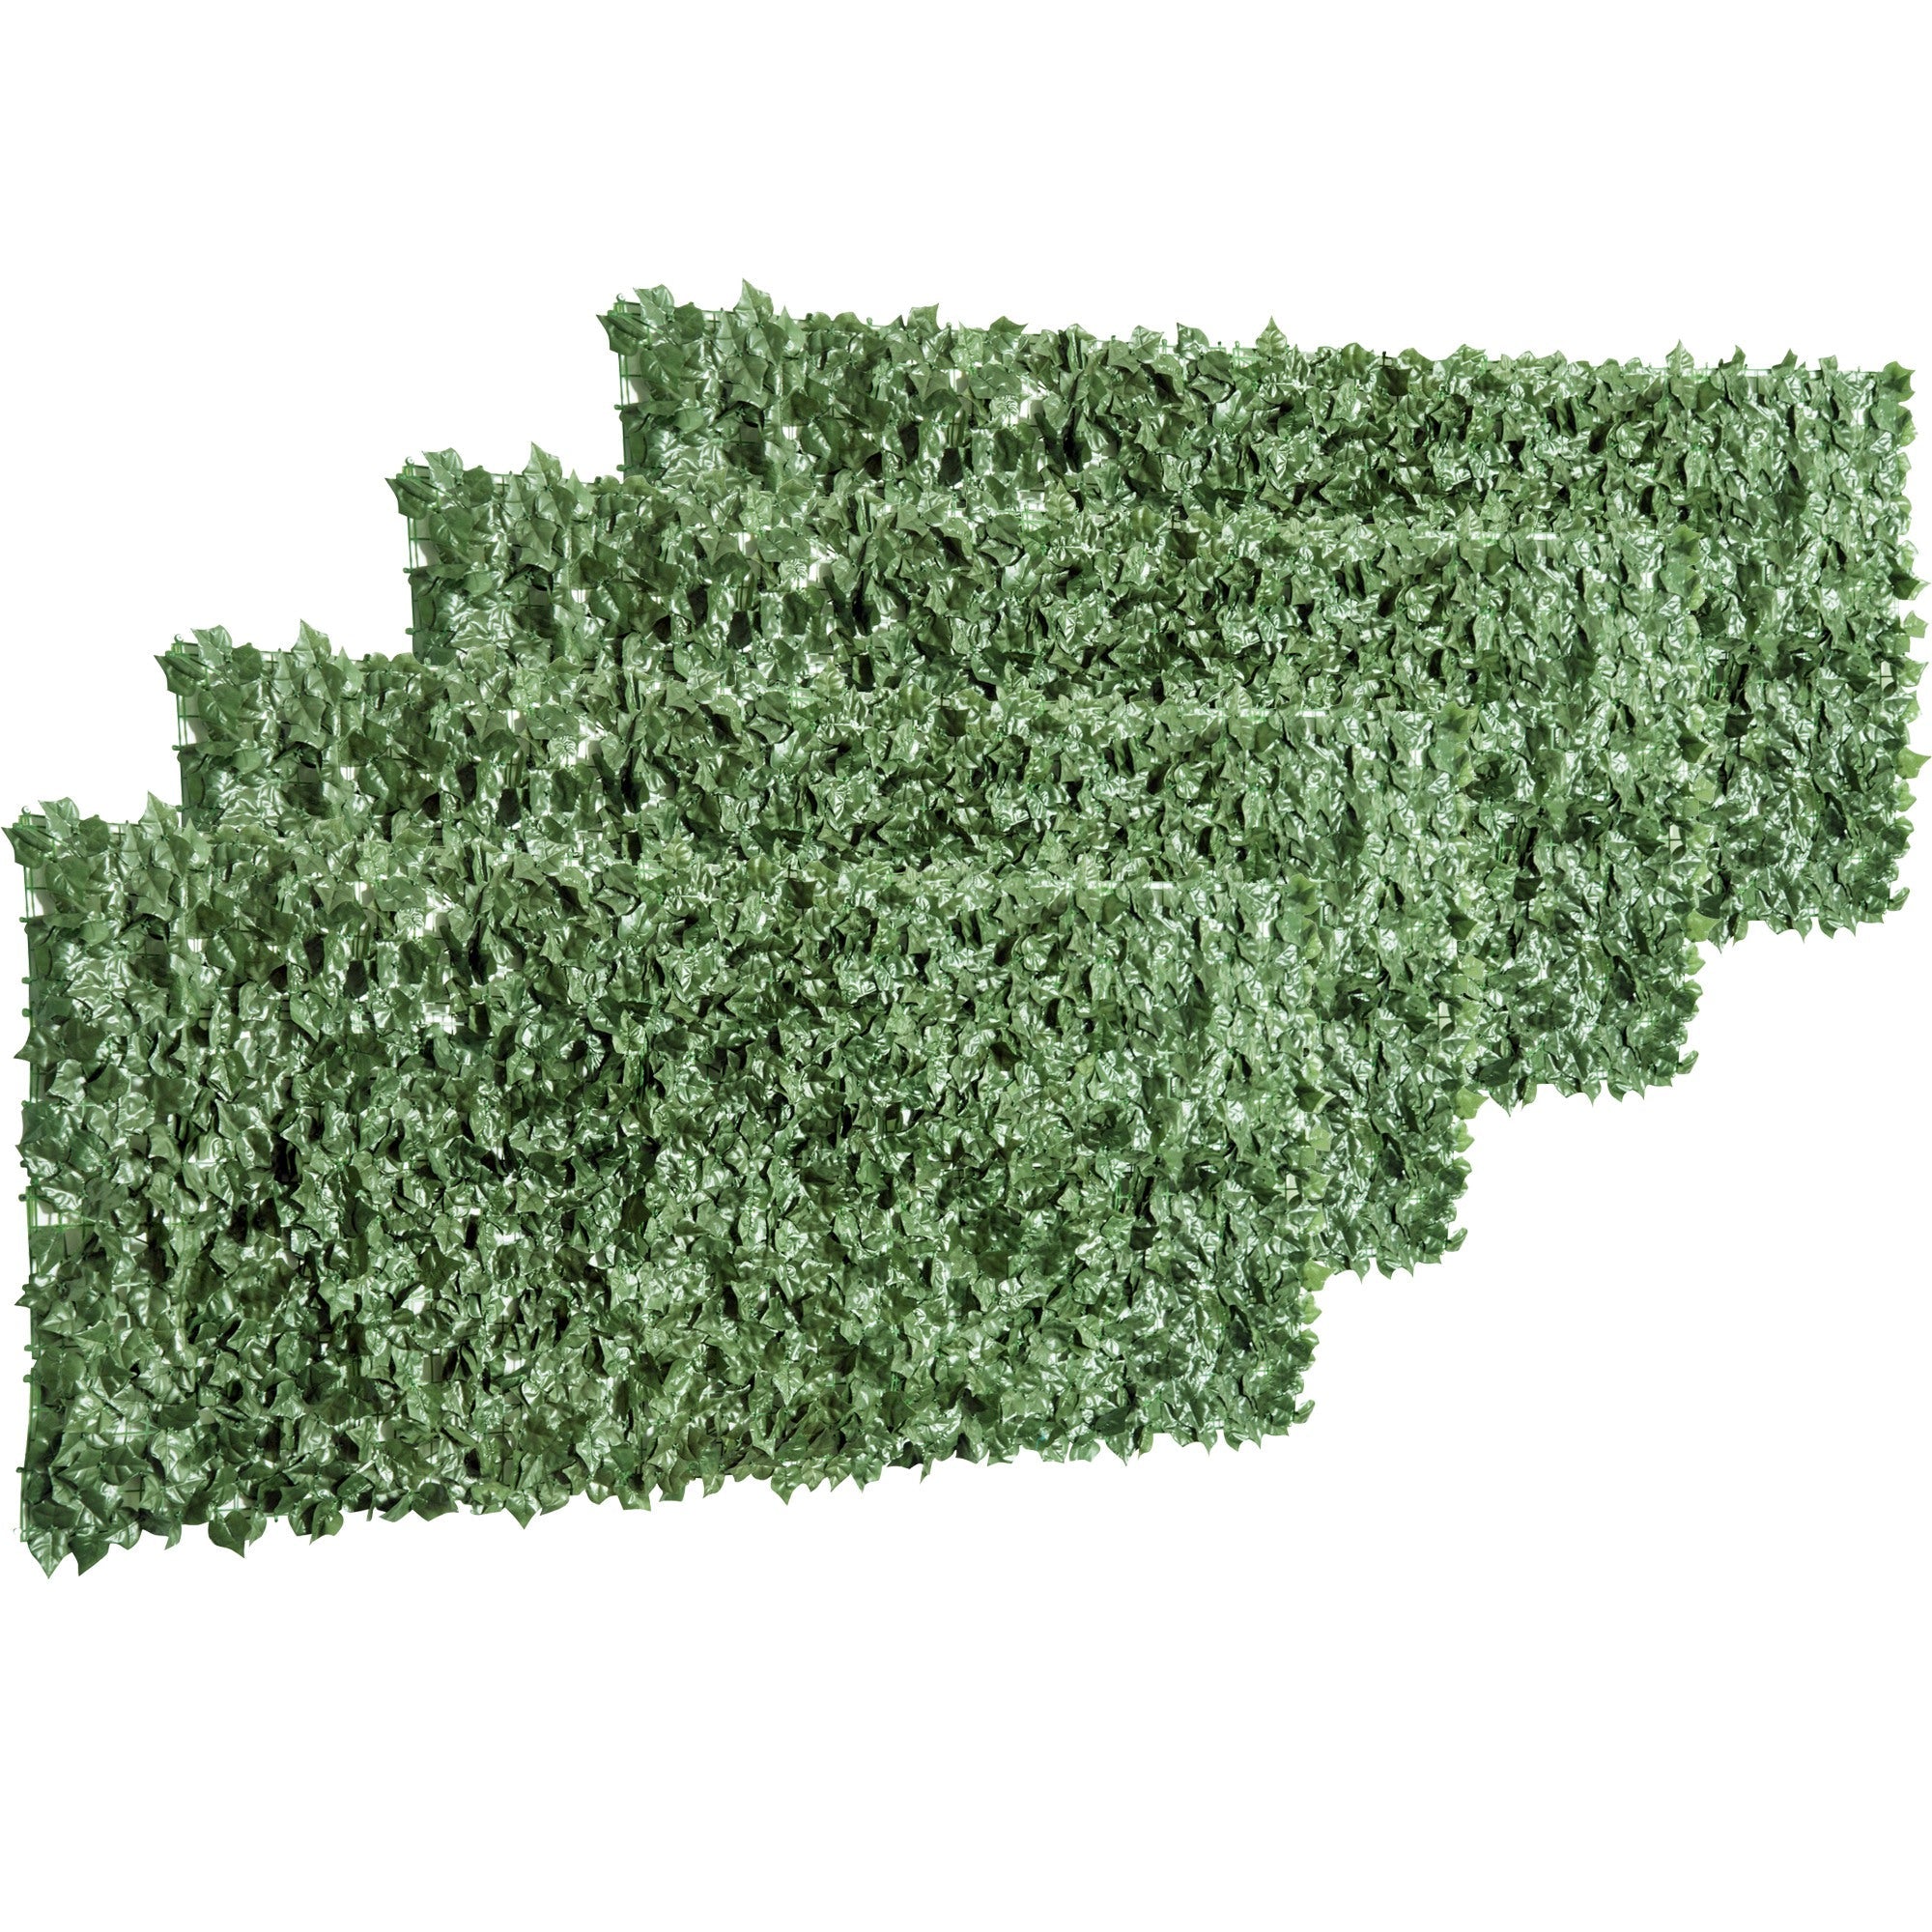 4-Piece Artificial Leaf Hedge Screen Privacy Fence Panel for Garden Outdoor Indoor Decor, Dark Green, 2.4M x 1M-0